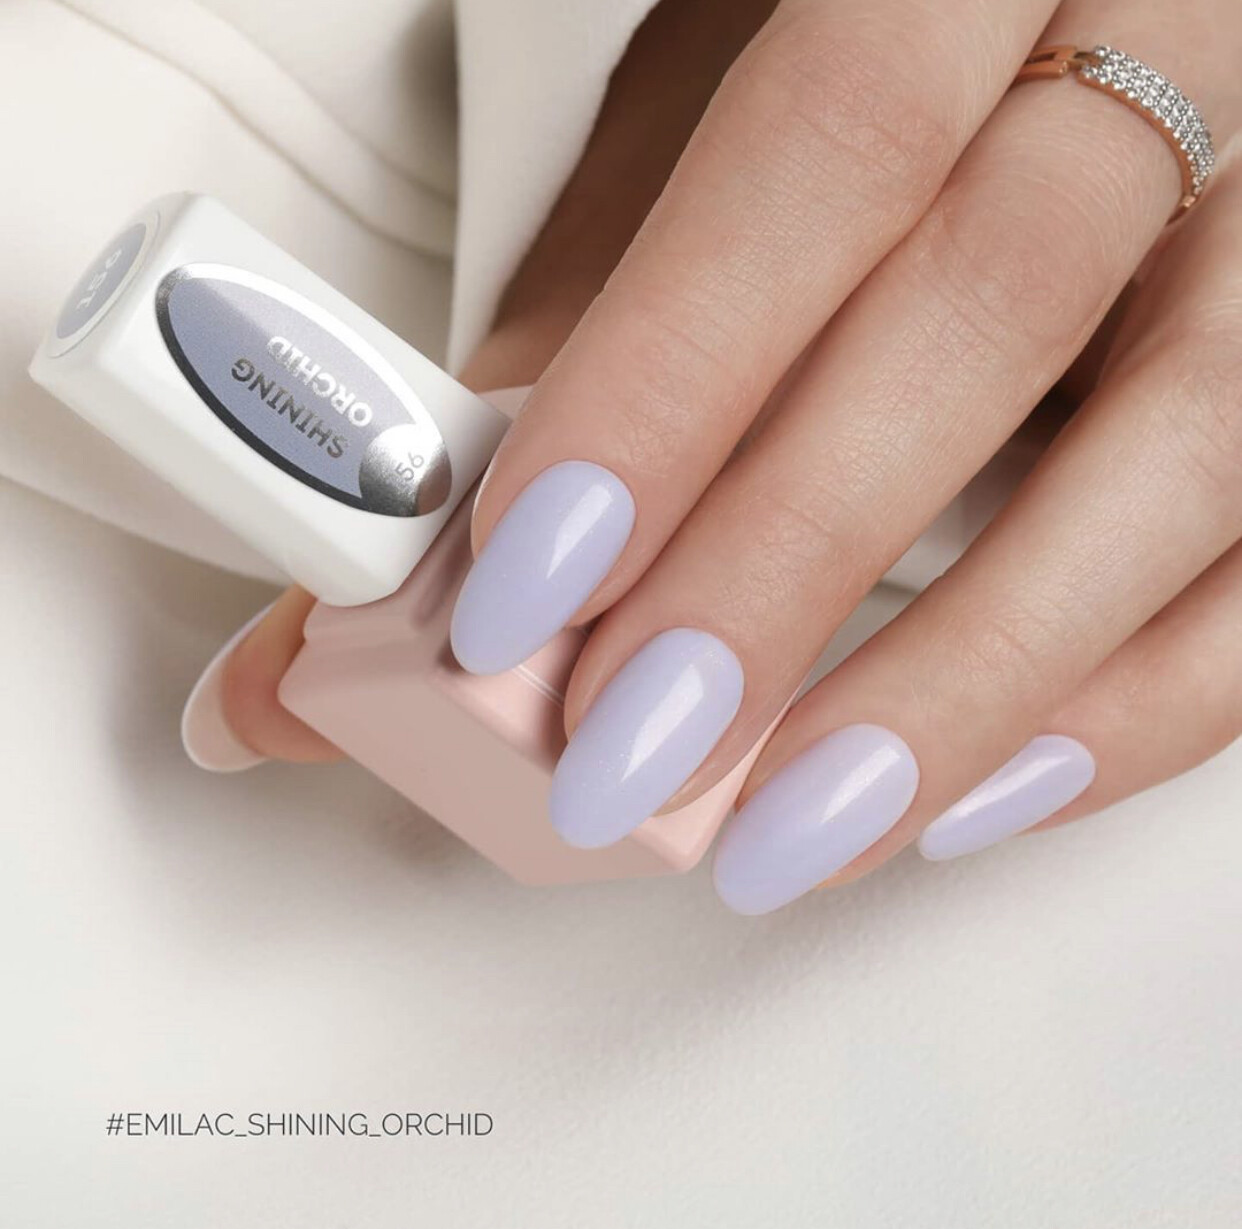 E.MiLac #156 Shining Orchid — feminine light-lilac shade with silver shimmer